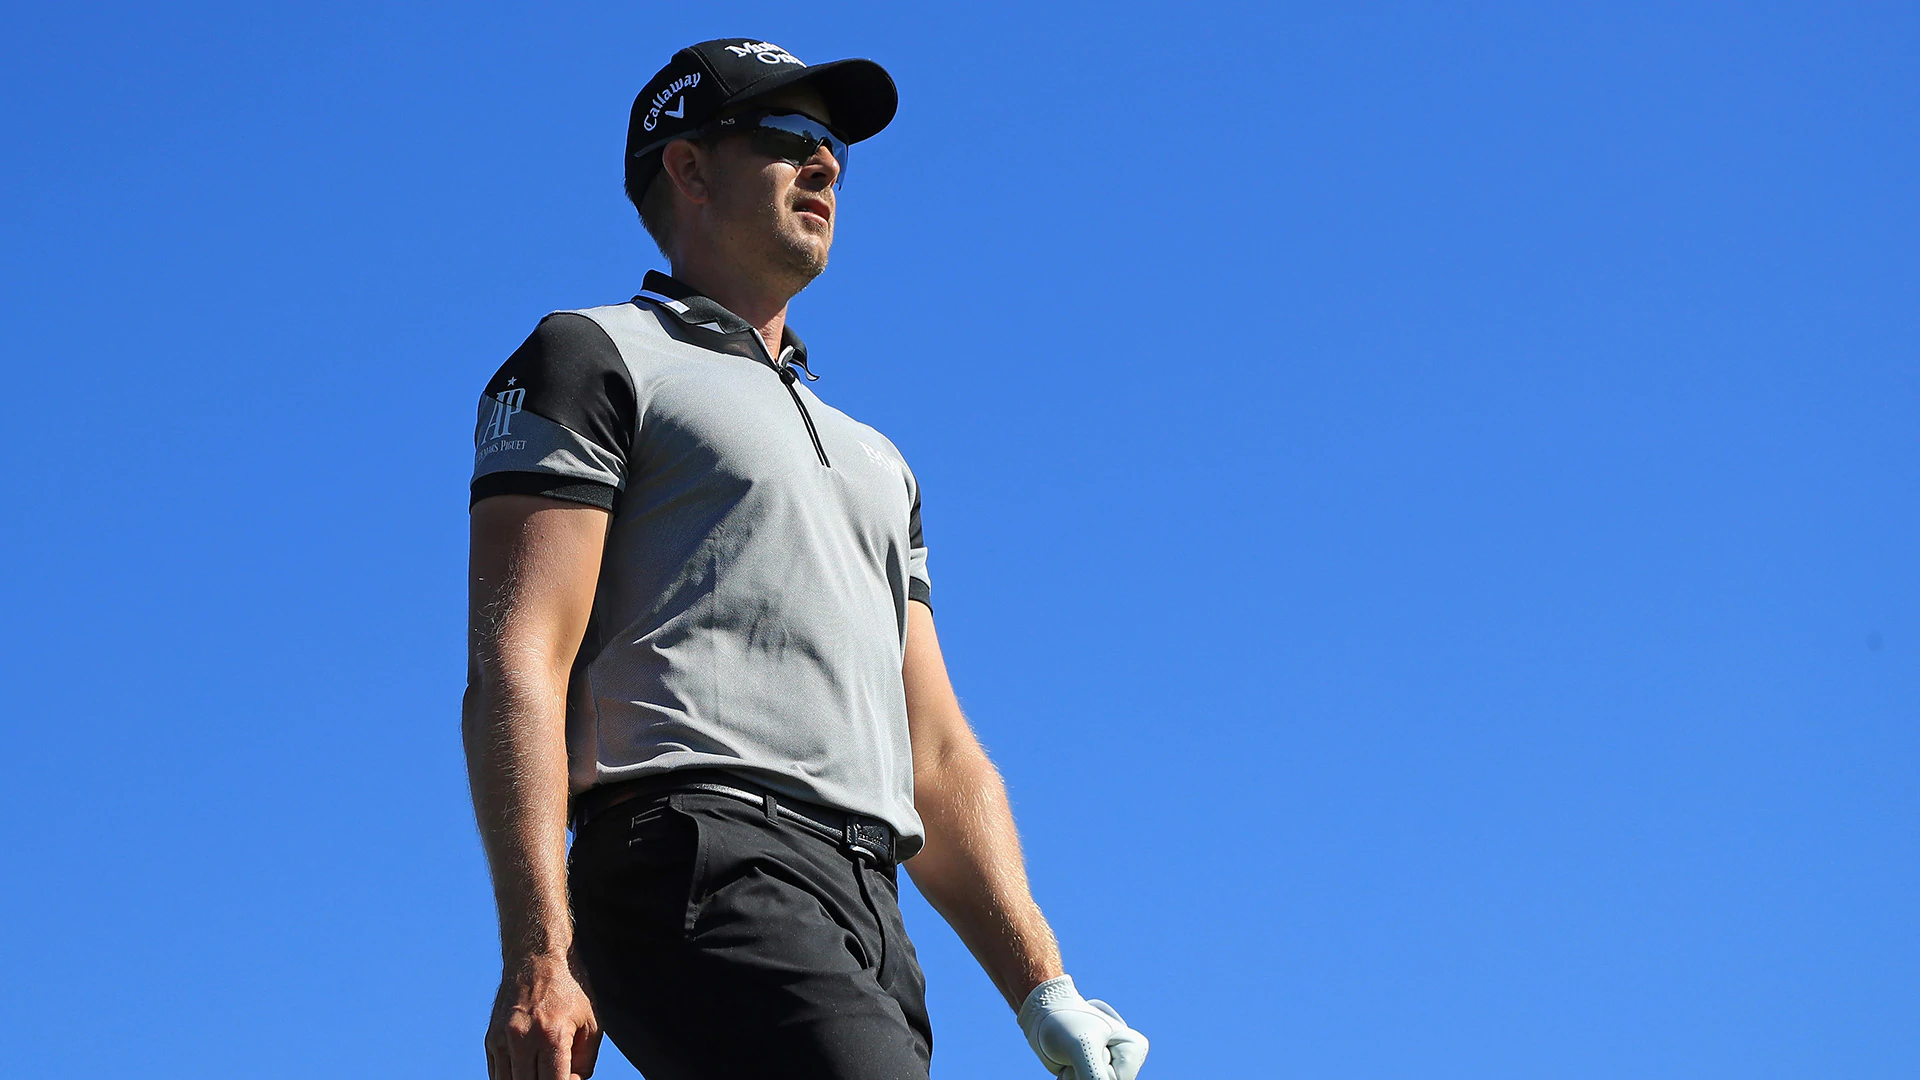 Stenson leads API, sets personal best score on Day 1